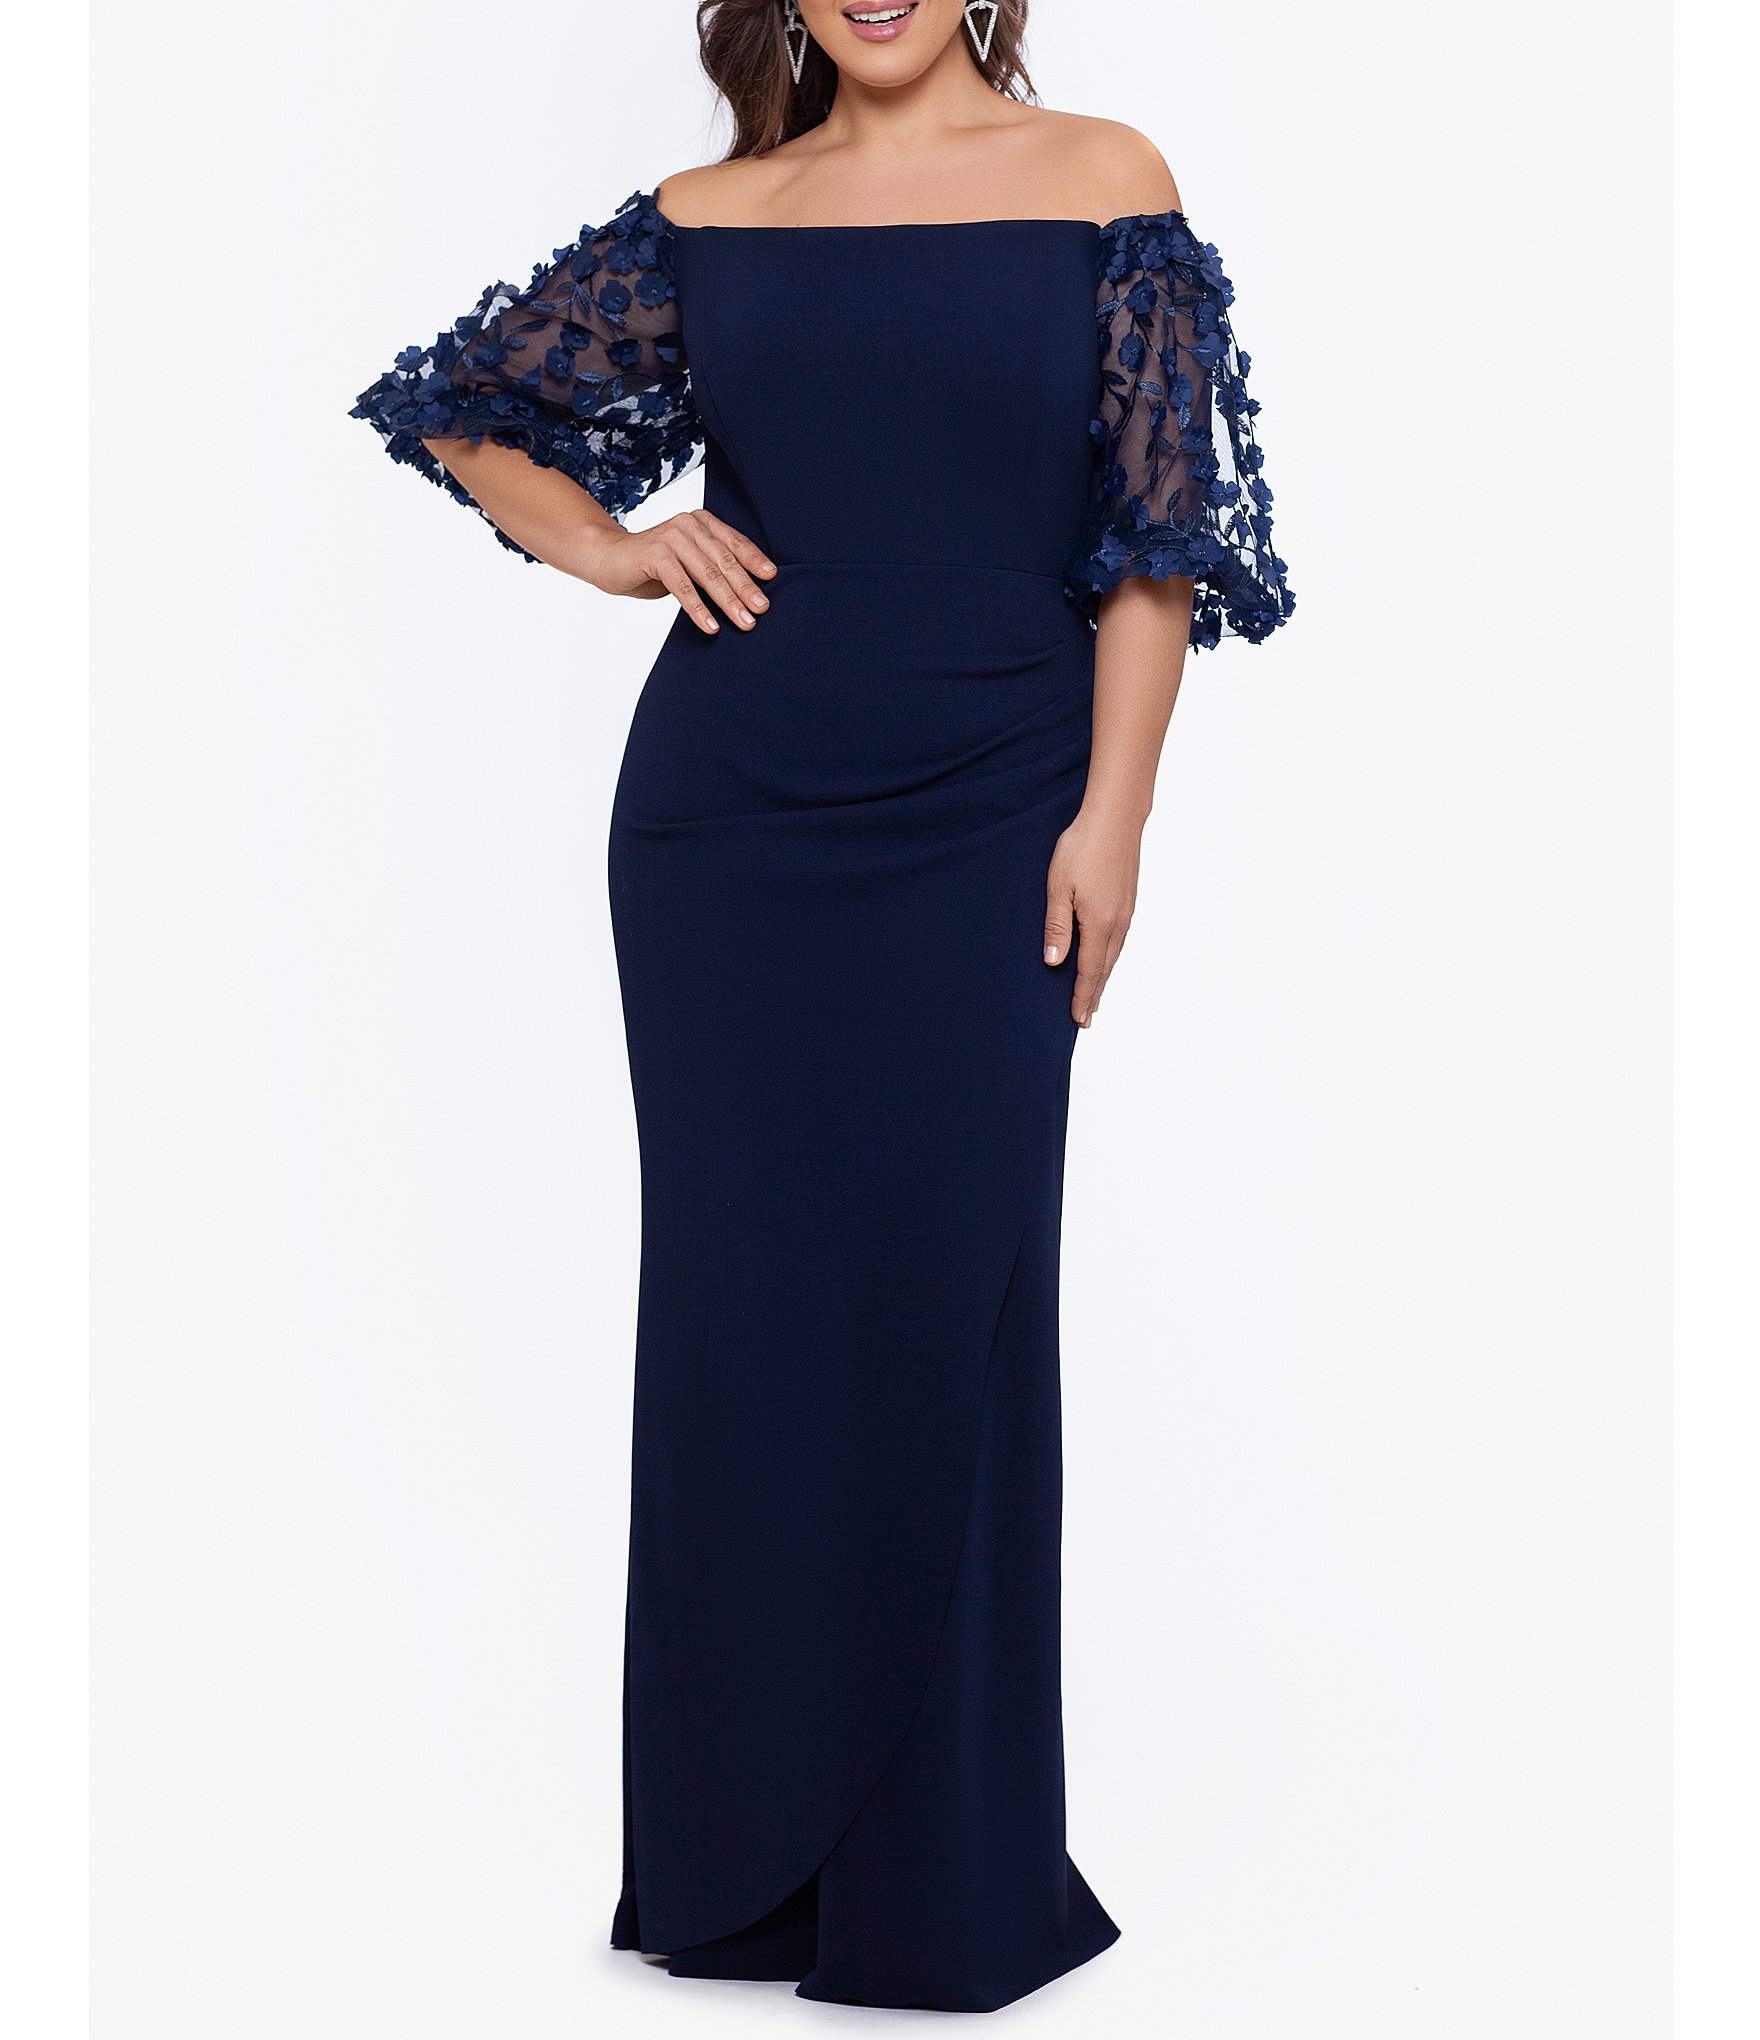 Share 136+ off shoulder gown for chubby latest - camera.edu.vn